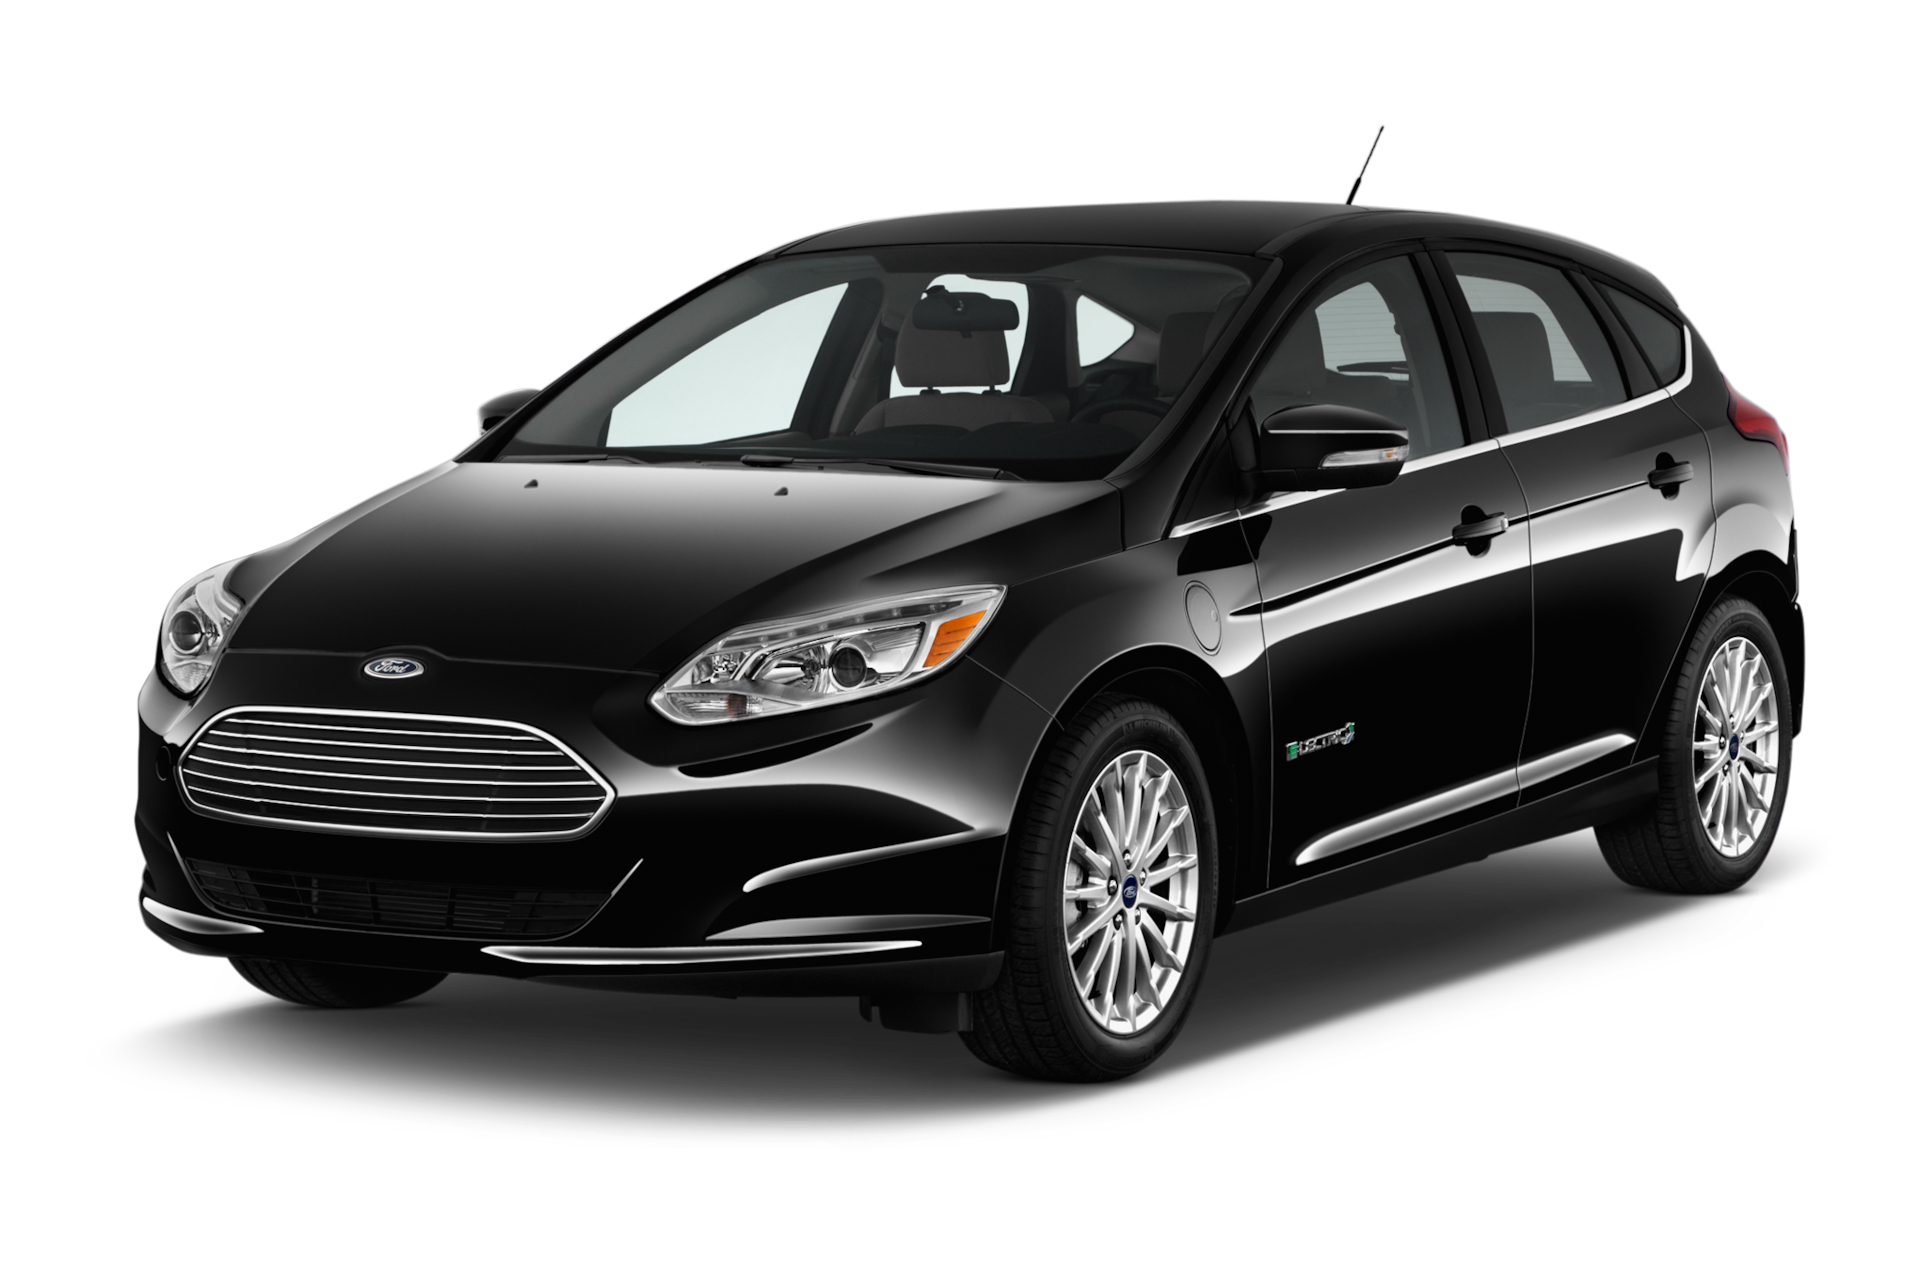 2017 Ford Focus Electric Prices, Reviews, and Photos - MotorTrend